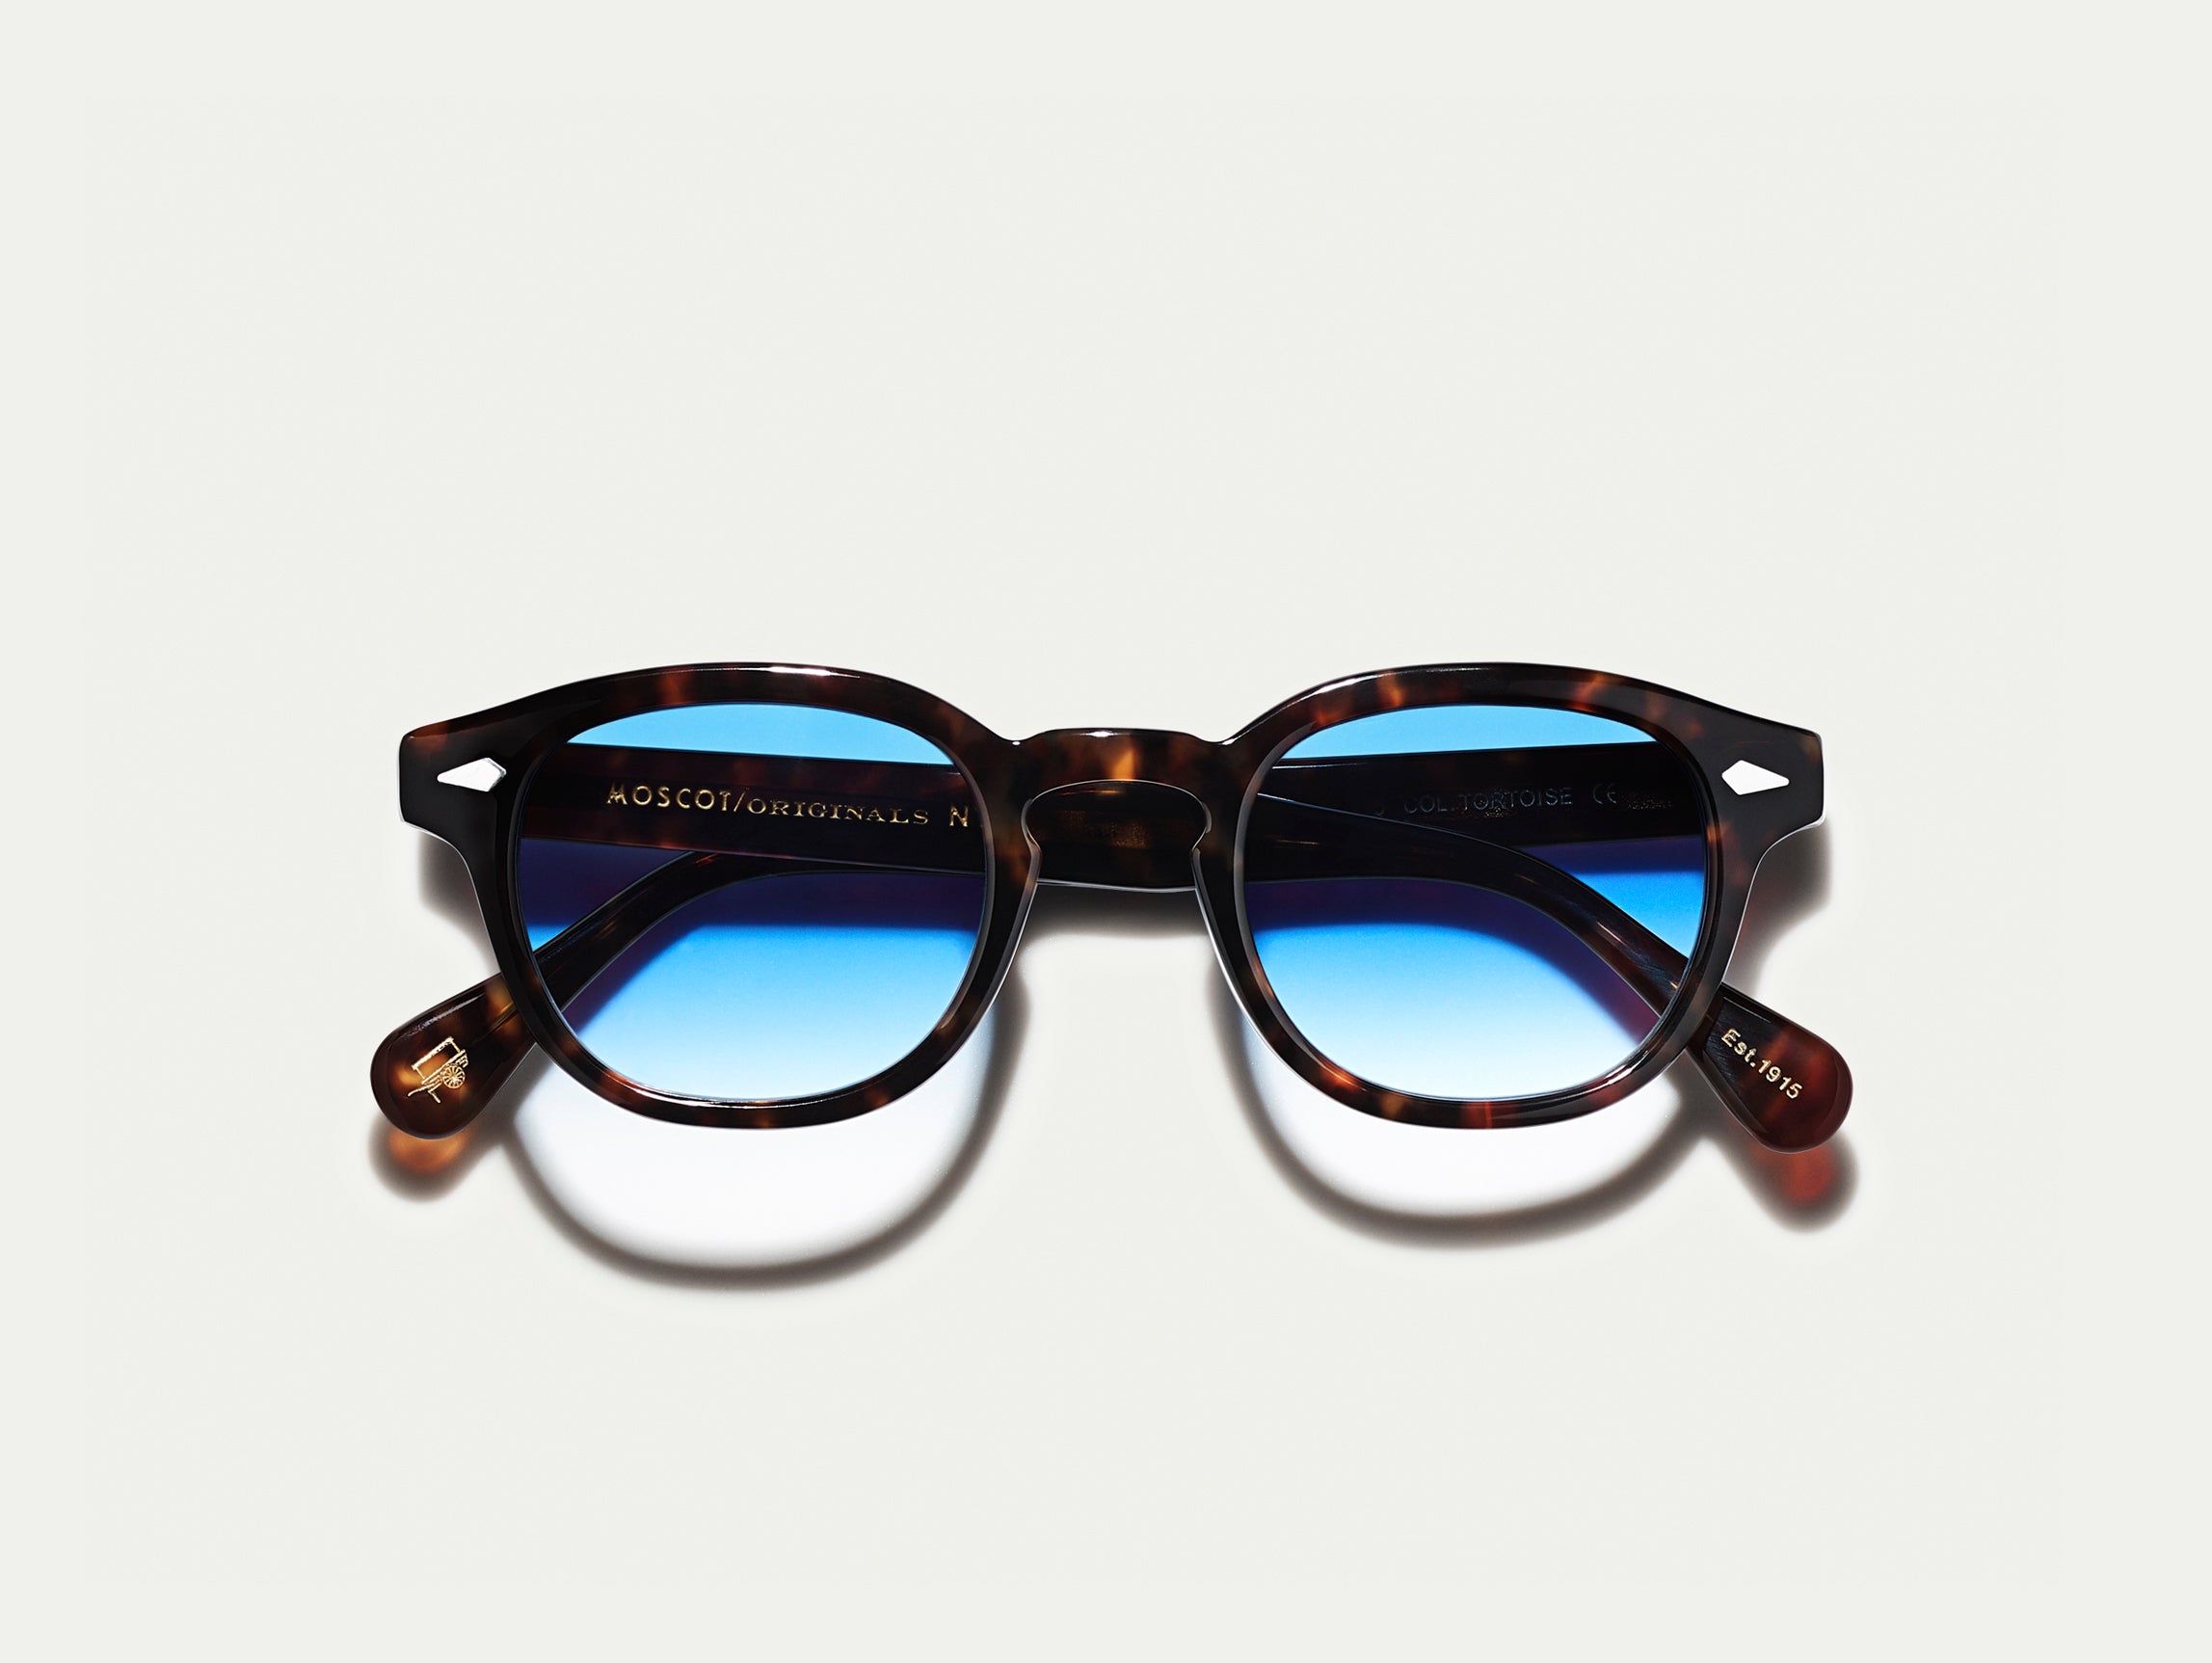 The LEMTOSH Tortoise with Broadway Blue Fade Tinted Lenses